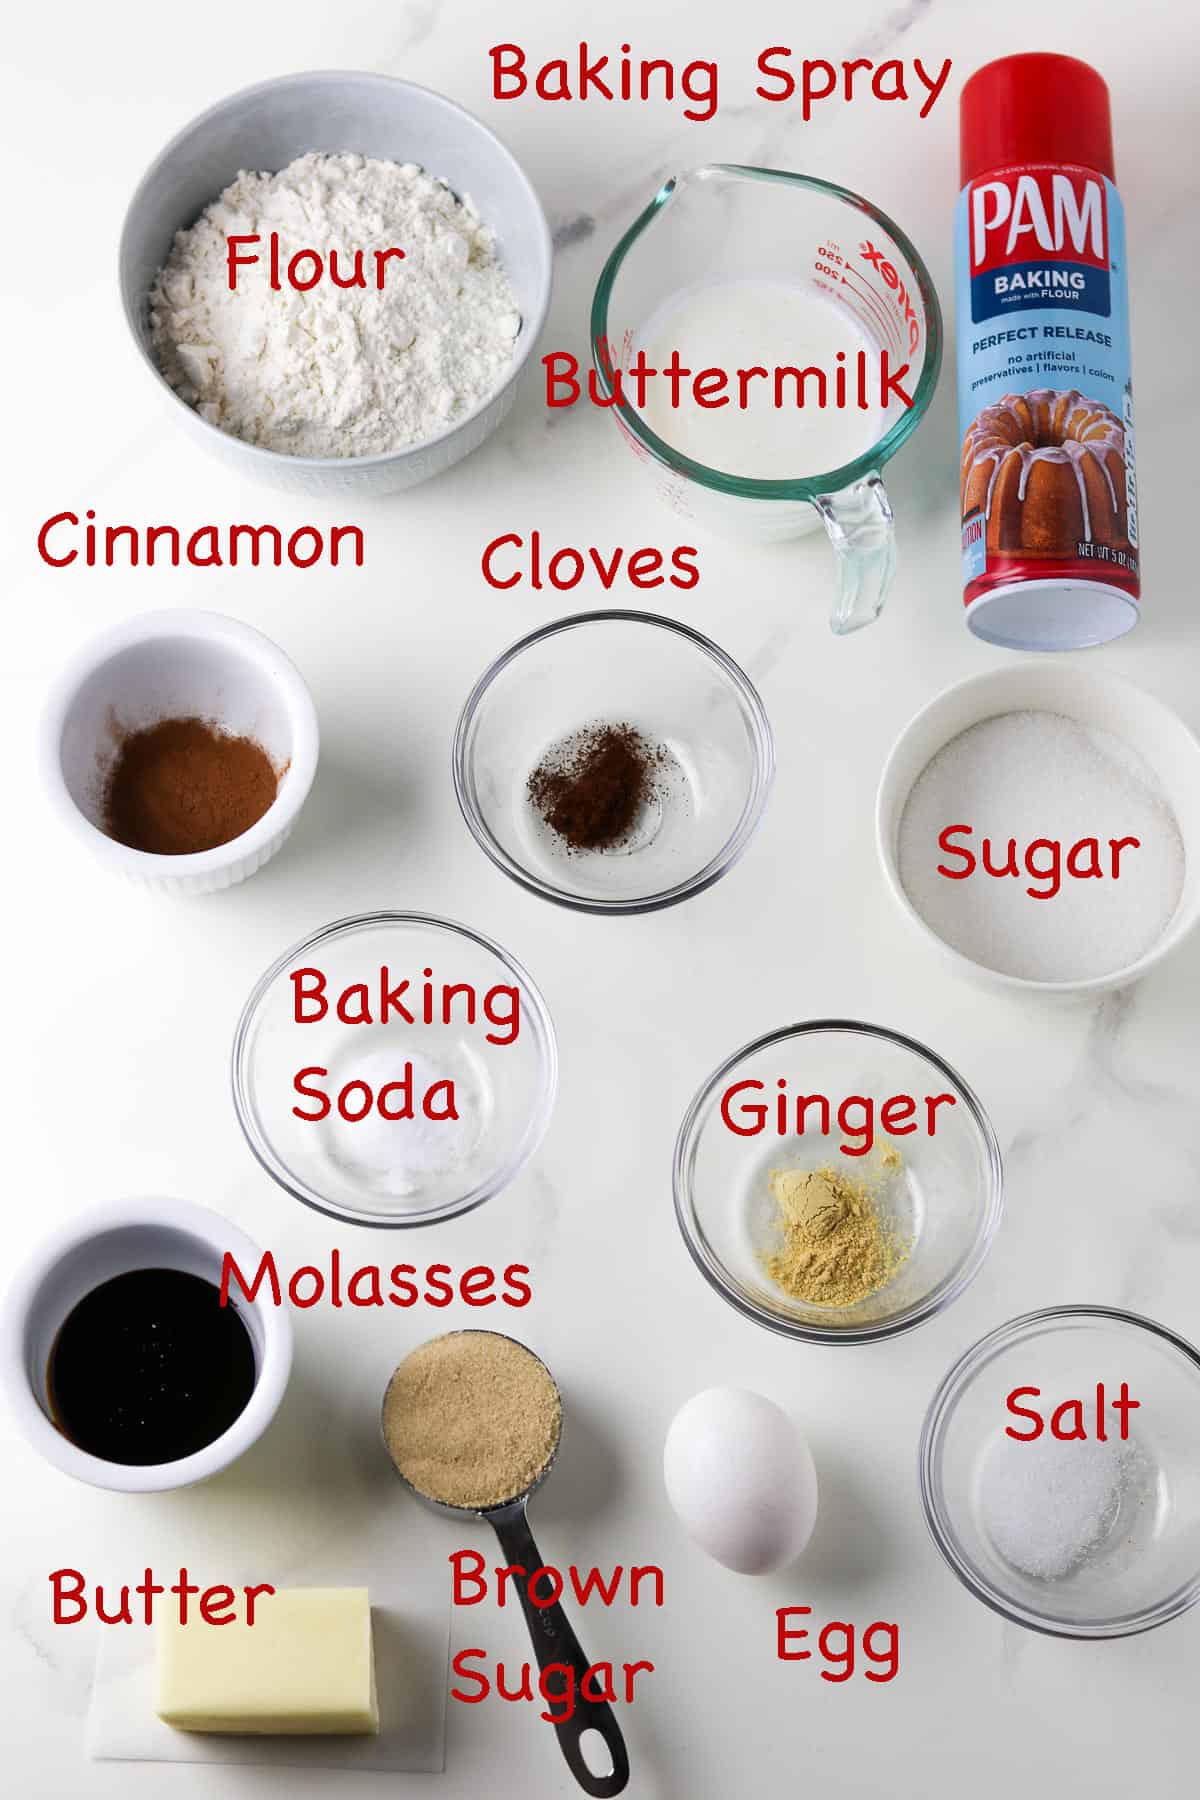 Labeled ingredients for Swedish Spice Cake.